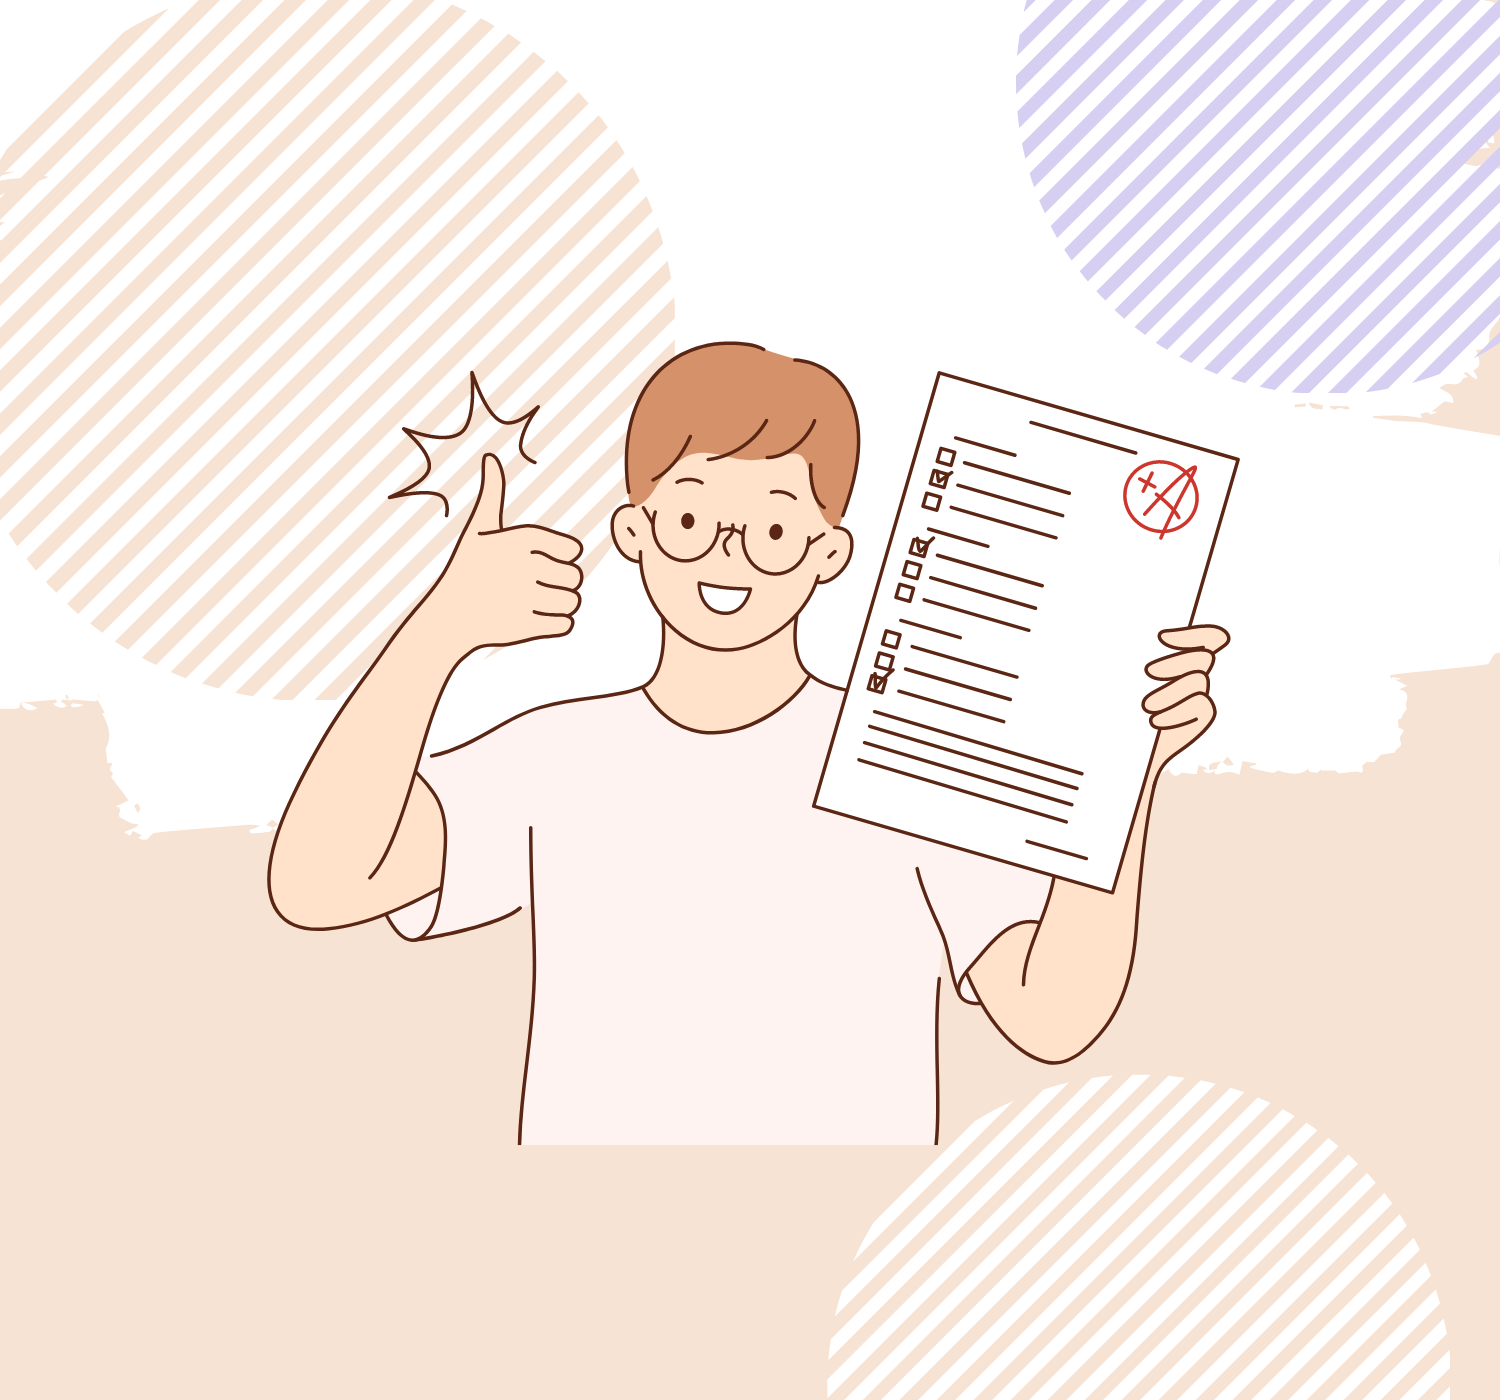 a cartoon of a man holding a paper and giving a thumbs up